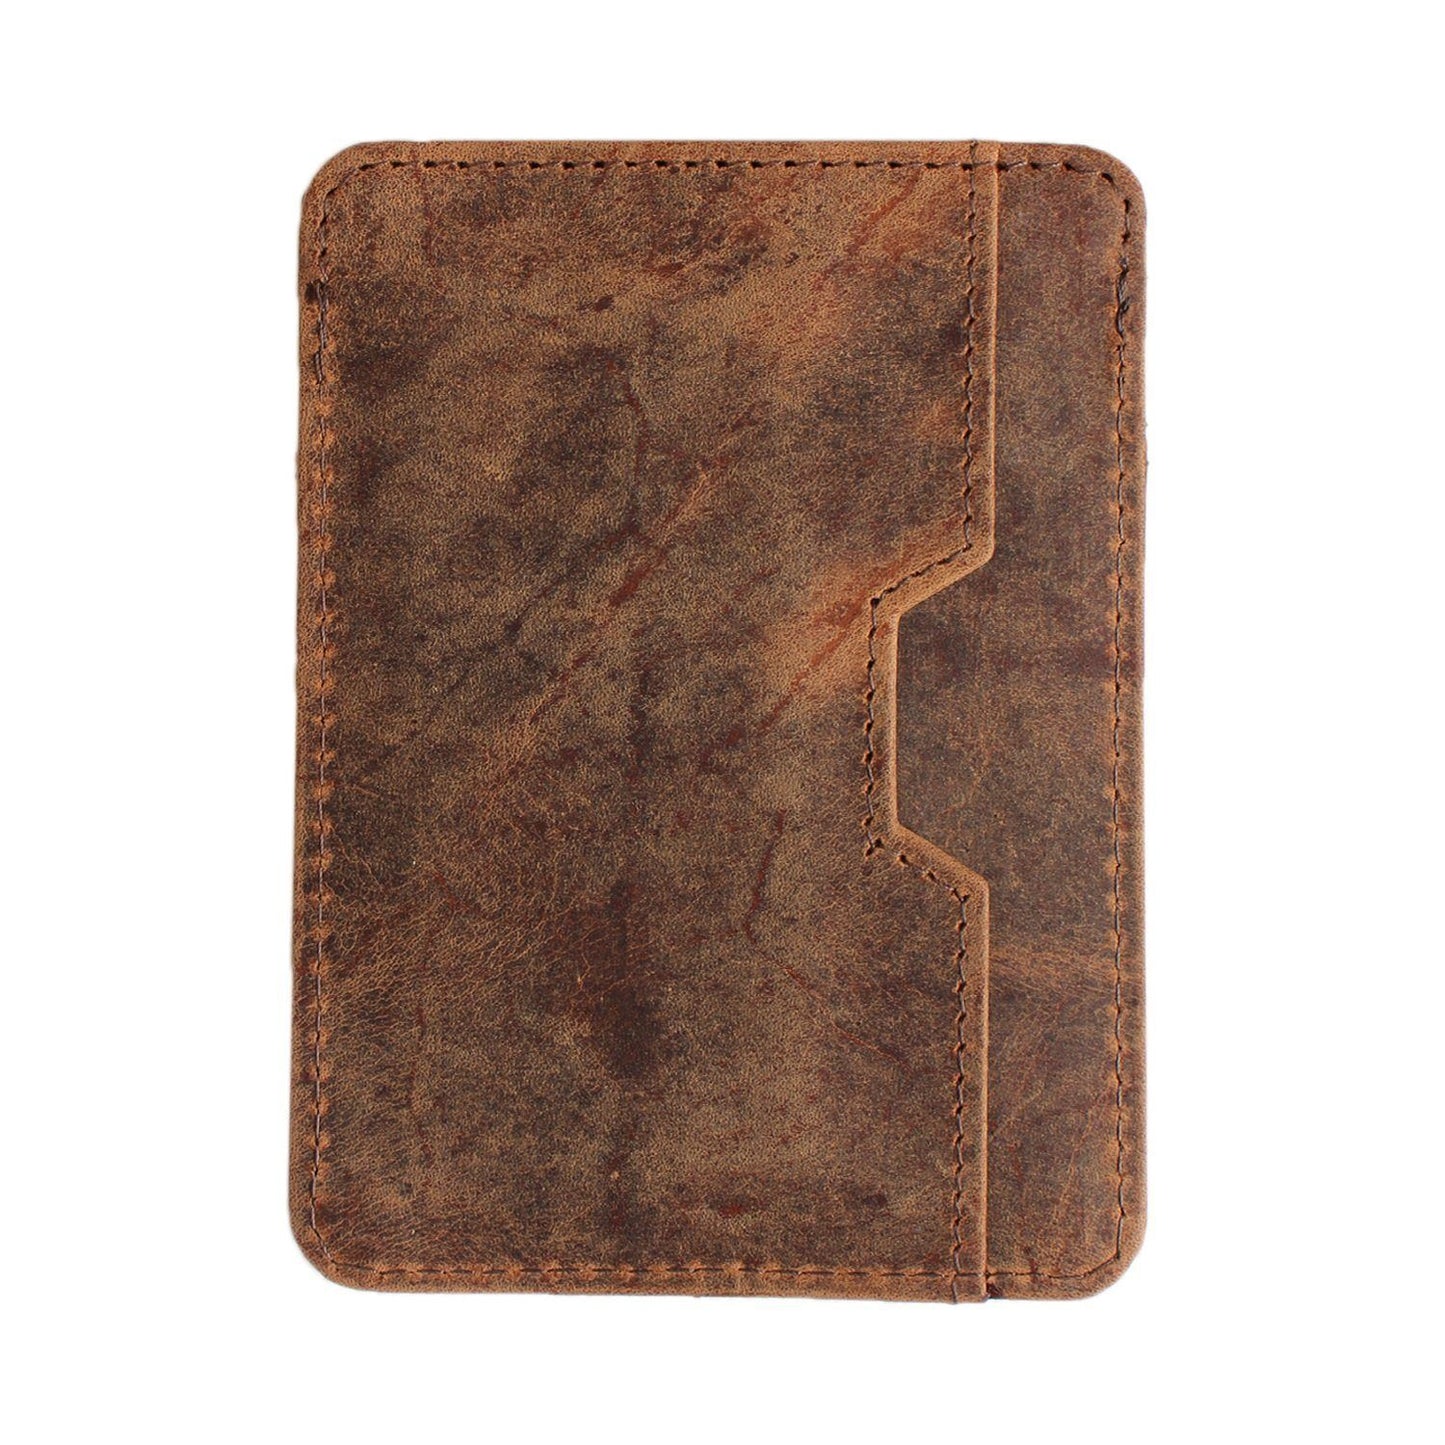 Brown Colour Italian Leather Slim Wallet/Card Holder ( Holds Upto 5 Cards + Cash Compartment) Cathy London 